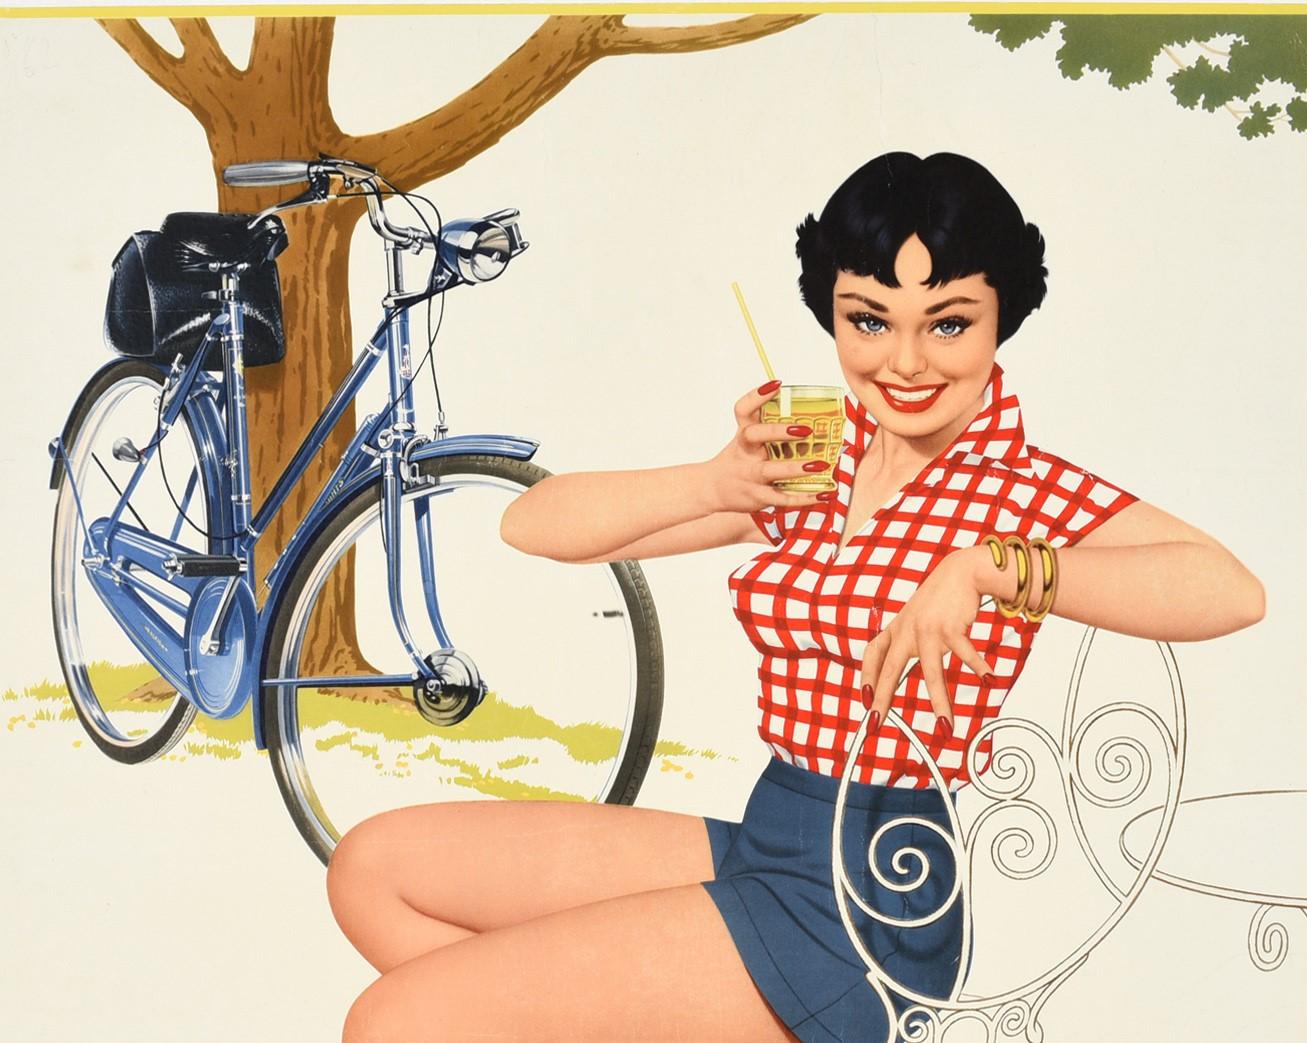 Original Vintage Raleigh The All-Steel Bicycle Poster Midcentury Pin-Up Style Ad - Print by Archie Dickens